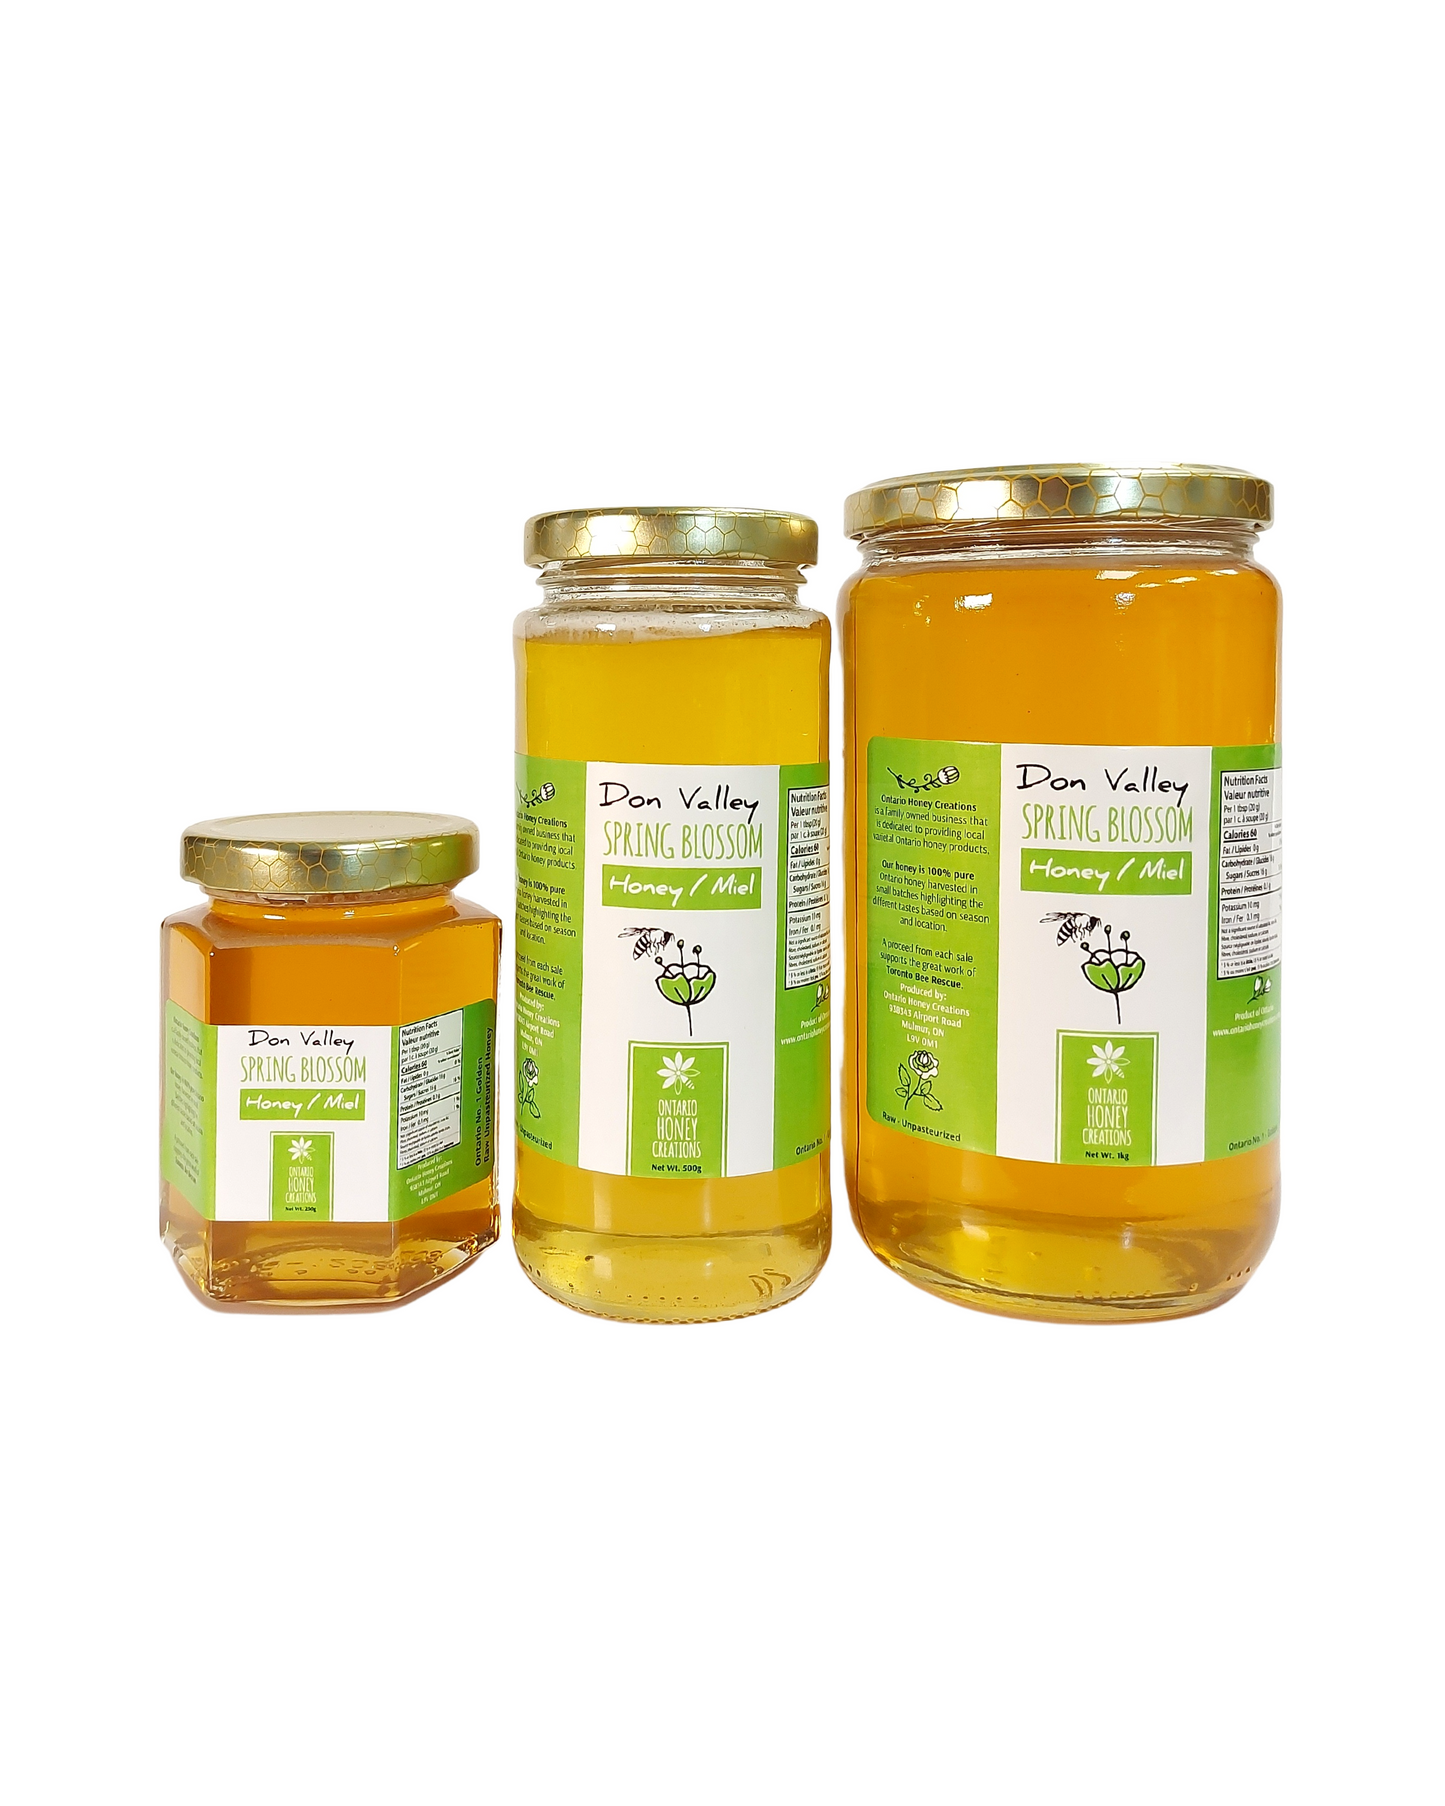 Don Valley Spring Blossom Honey Collection